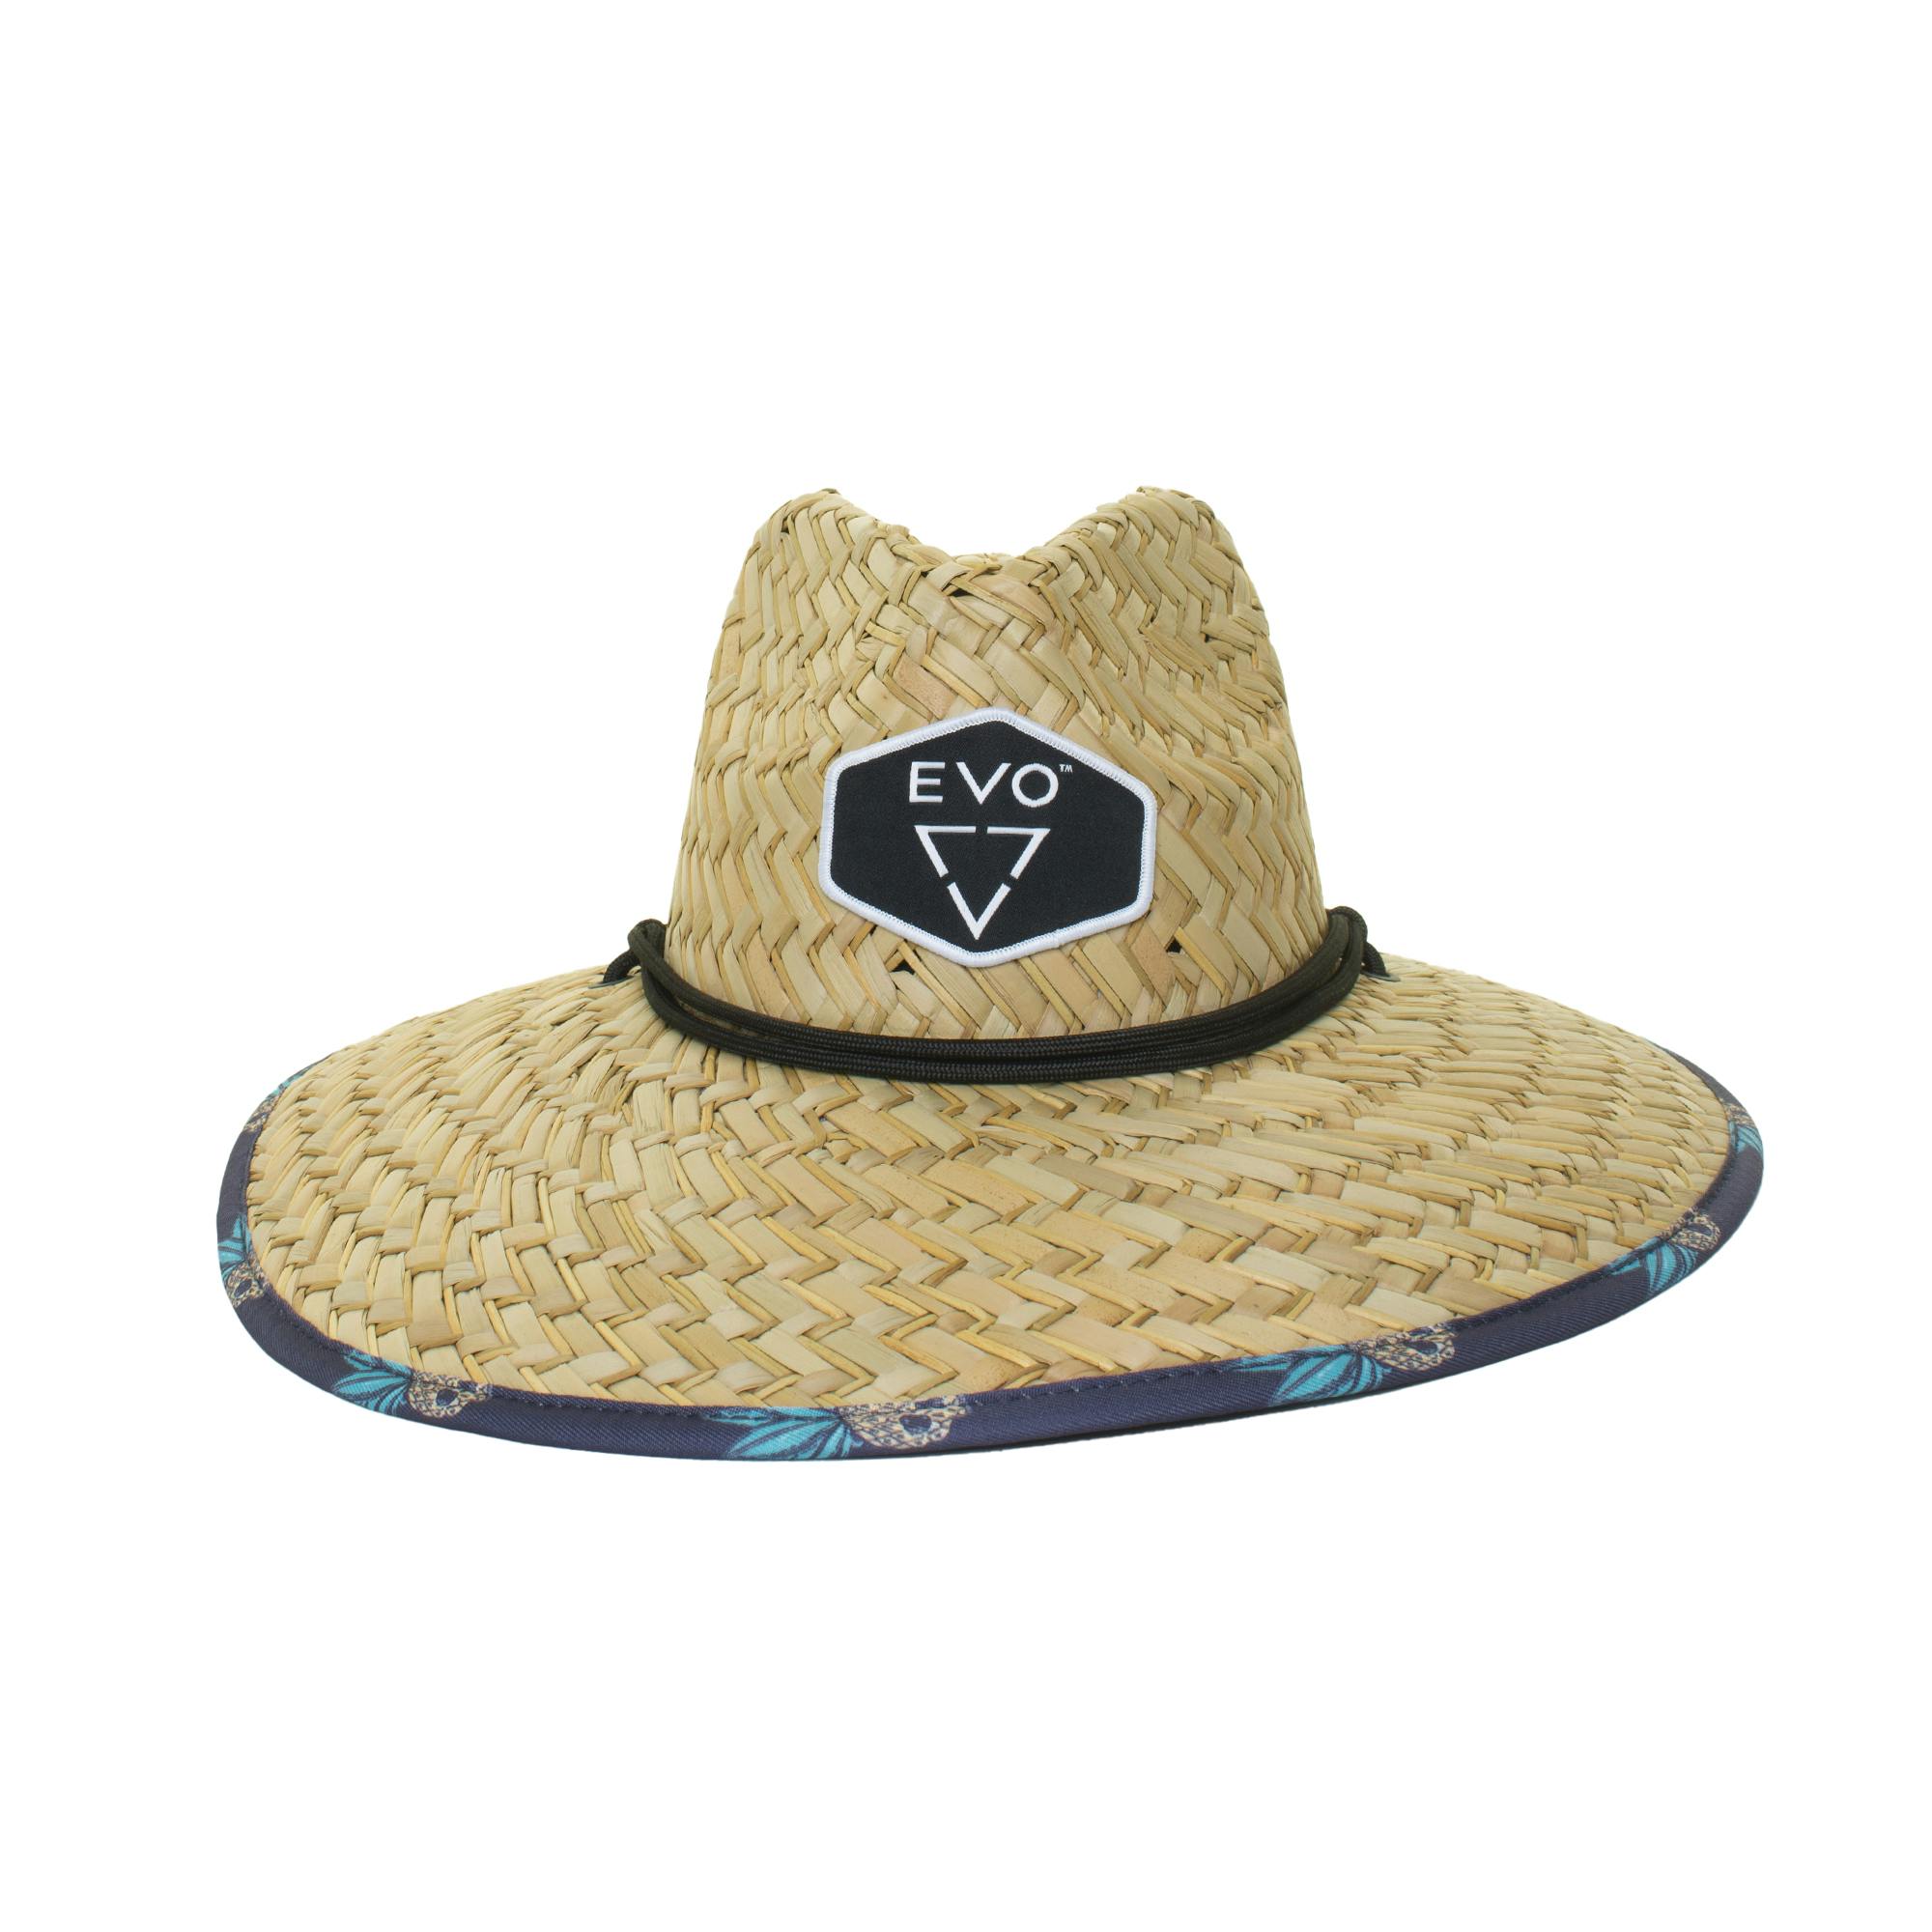 EVO Straw Lifeguard Hat - Skully (Men's) Front View